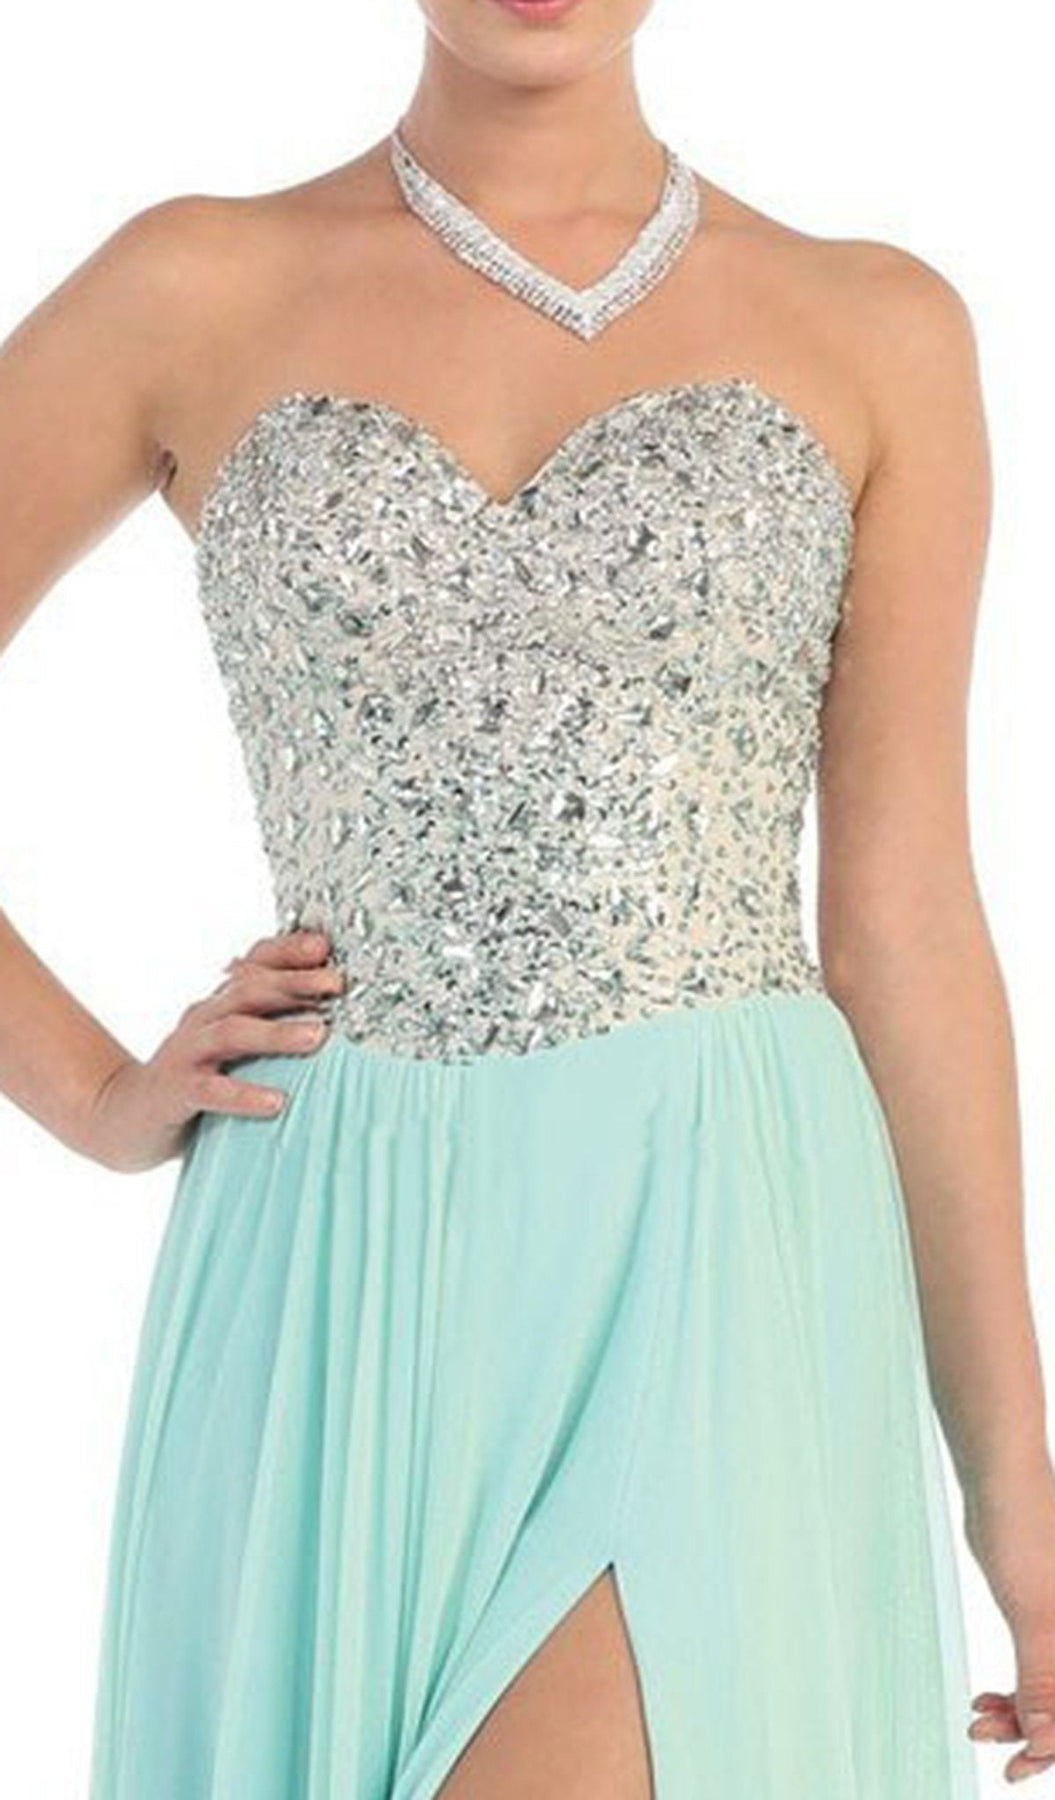 May Queen - Bedazzled Sweetheart A-line Prom Dress Special Occasion Dress